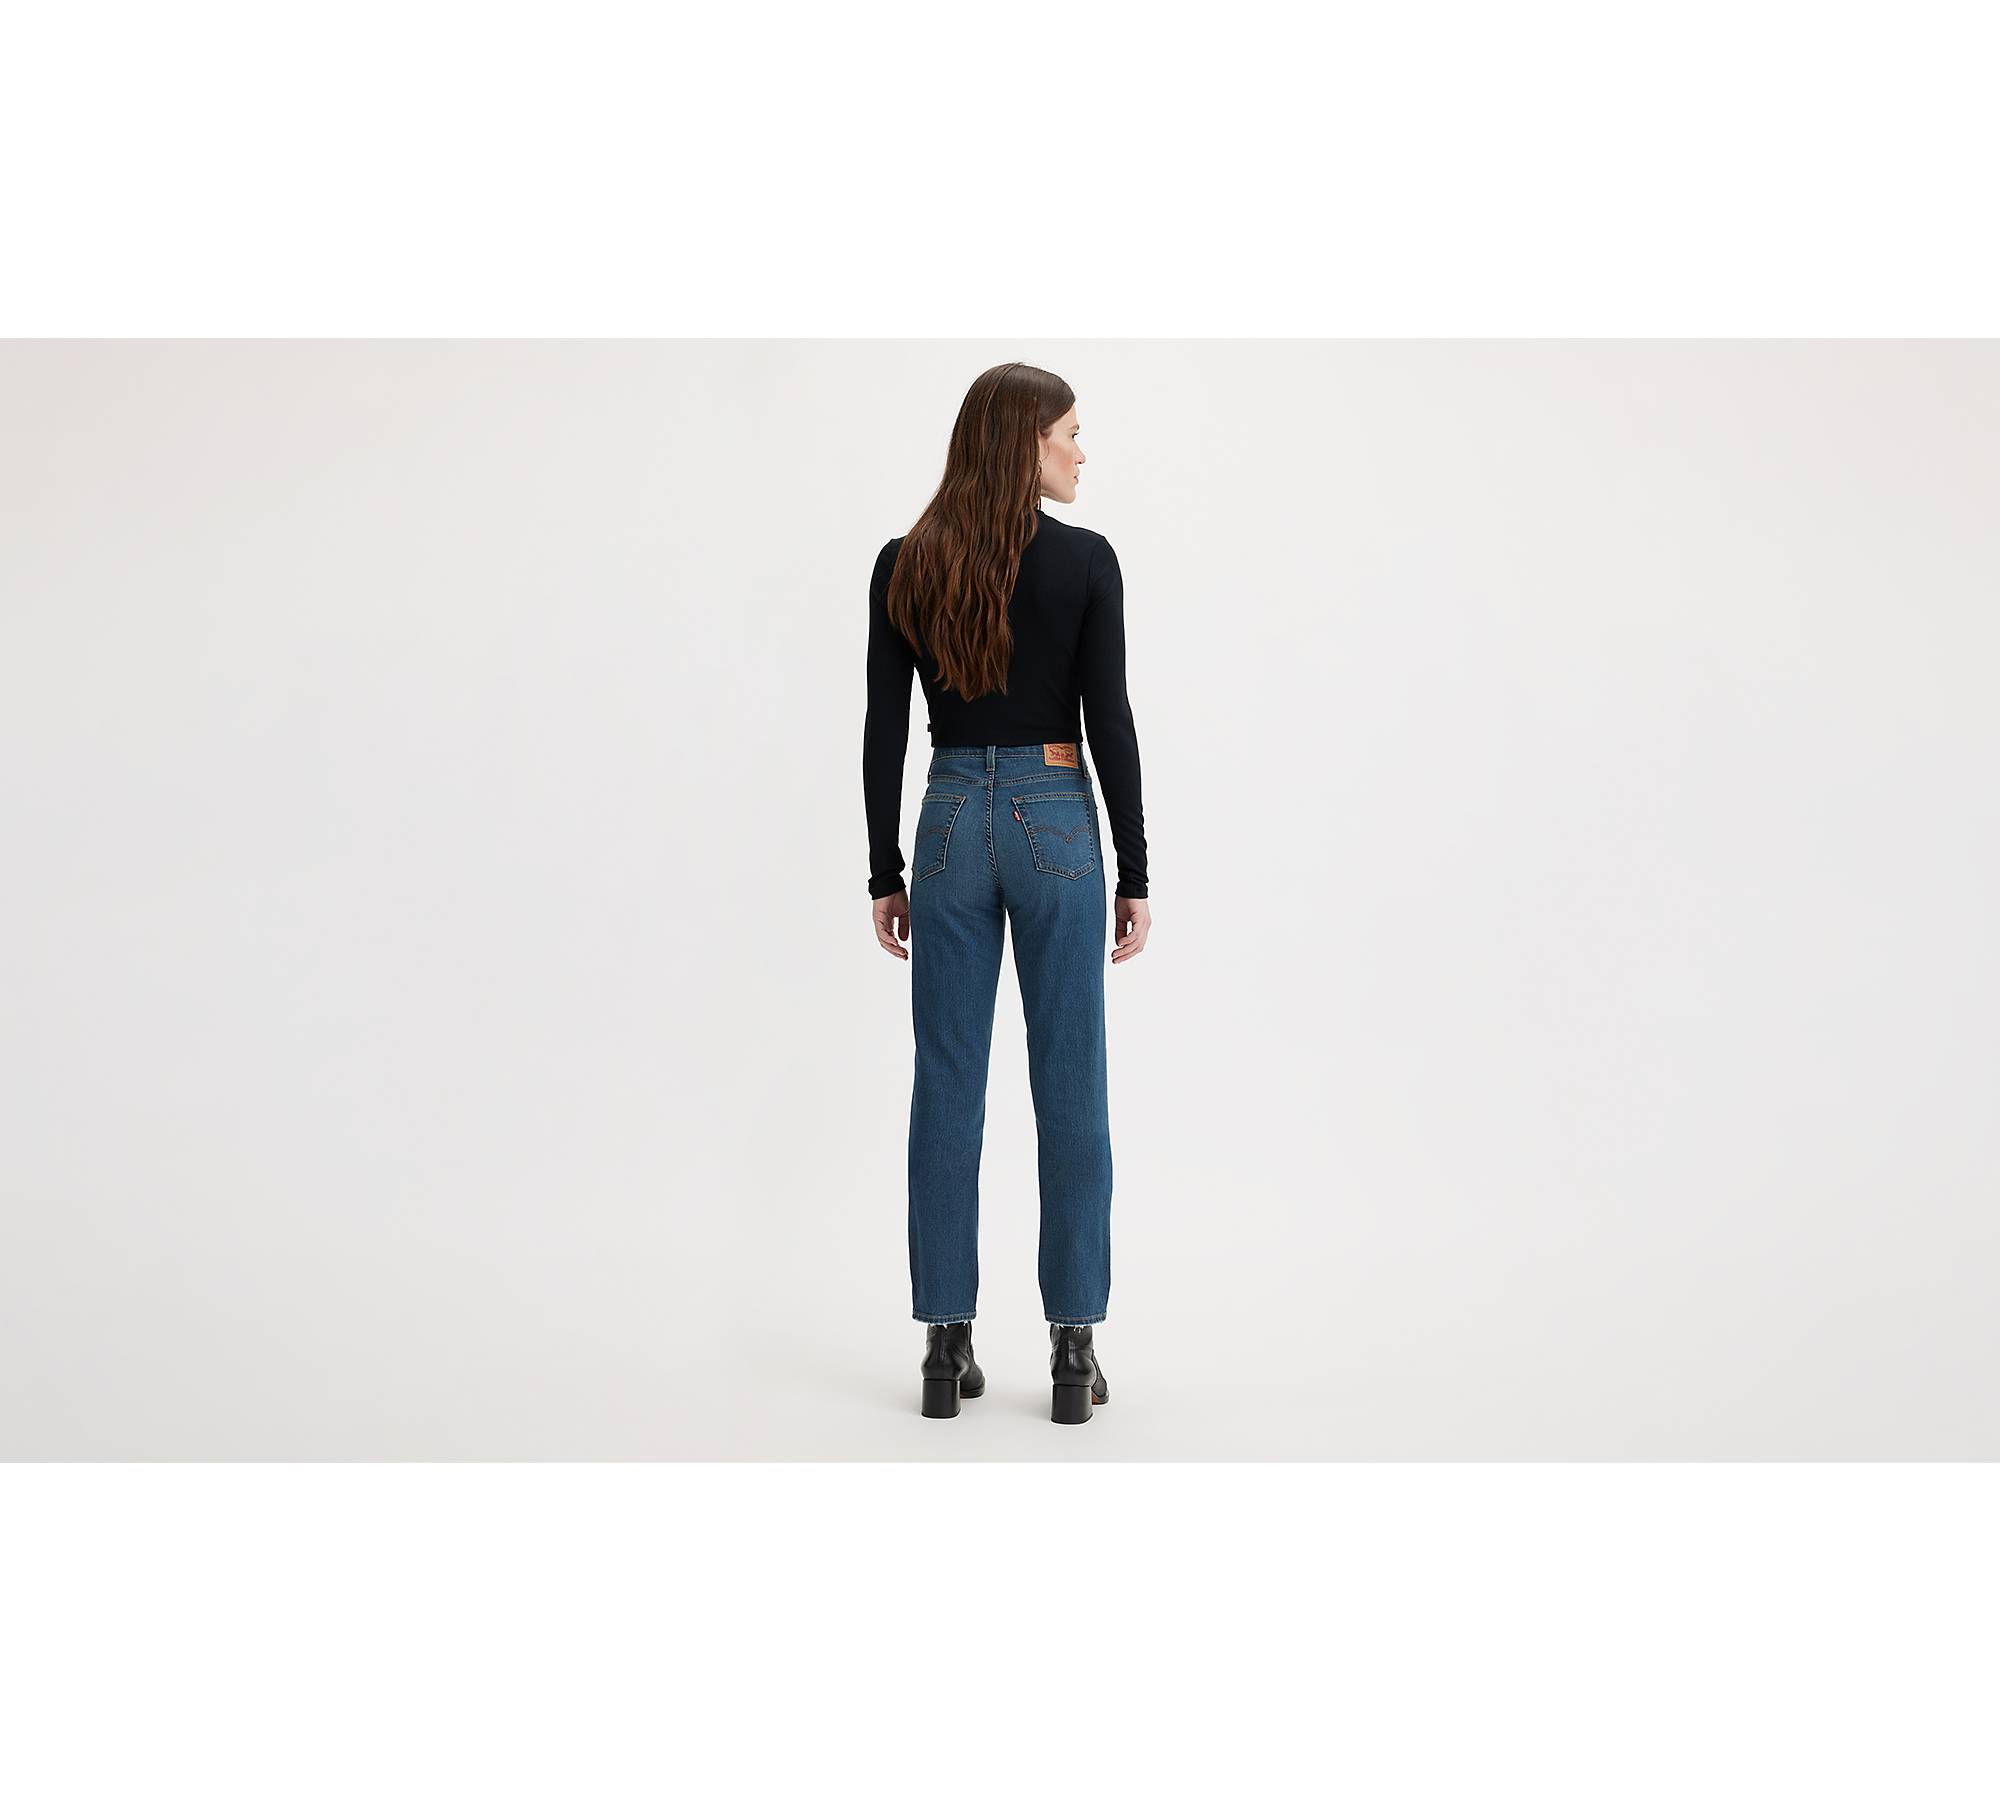 Best 25+ Deals for High Waisted Cropped Jeans